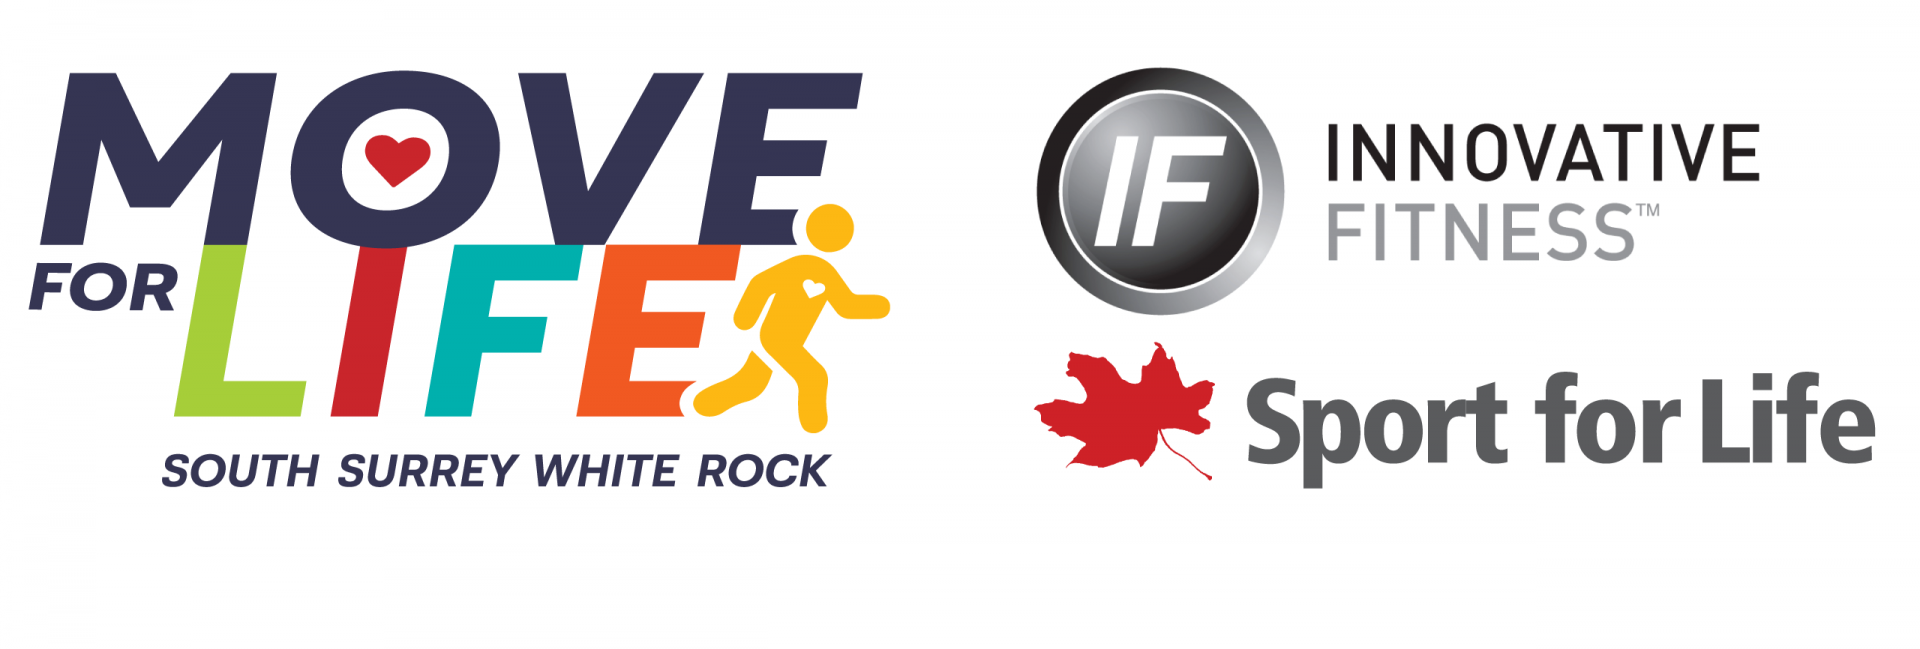 Move For Life Innovative Fitness and Sport For Life Logos